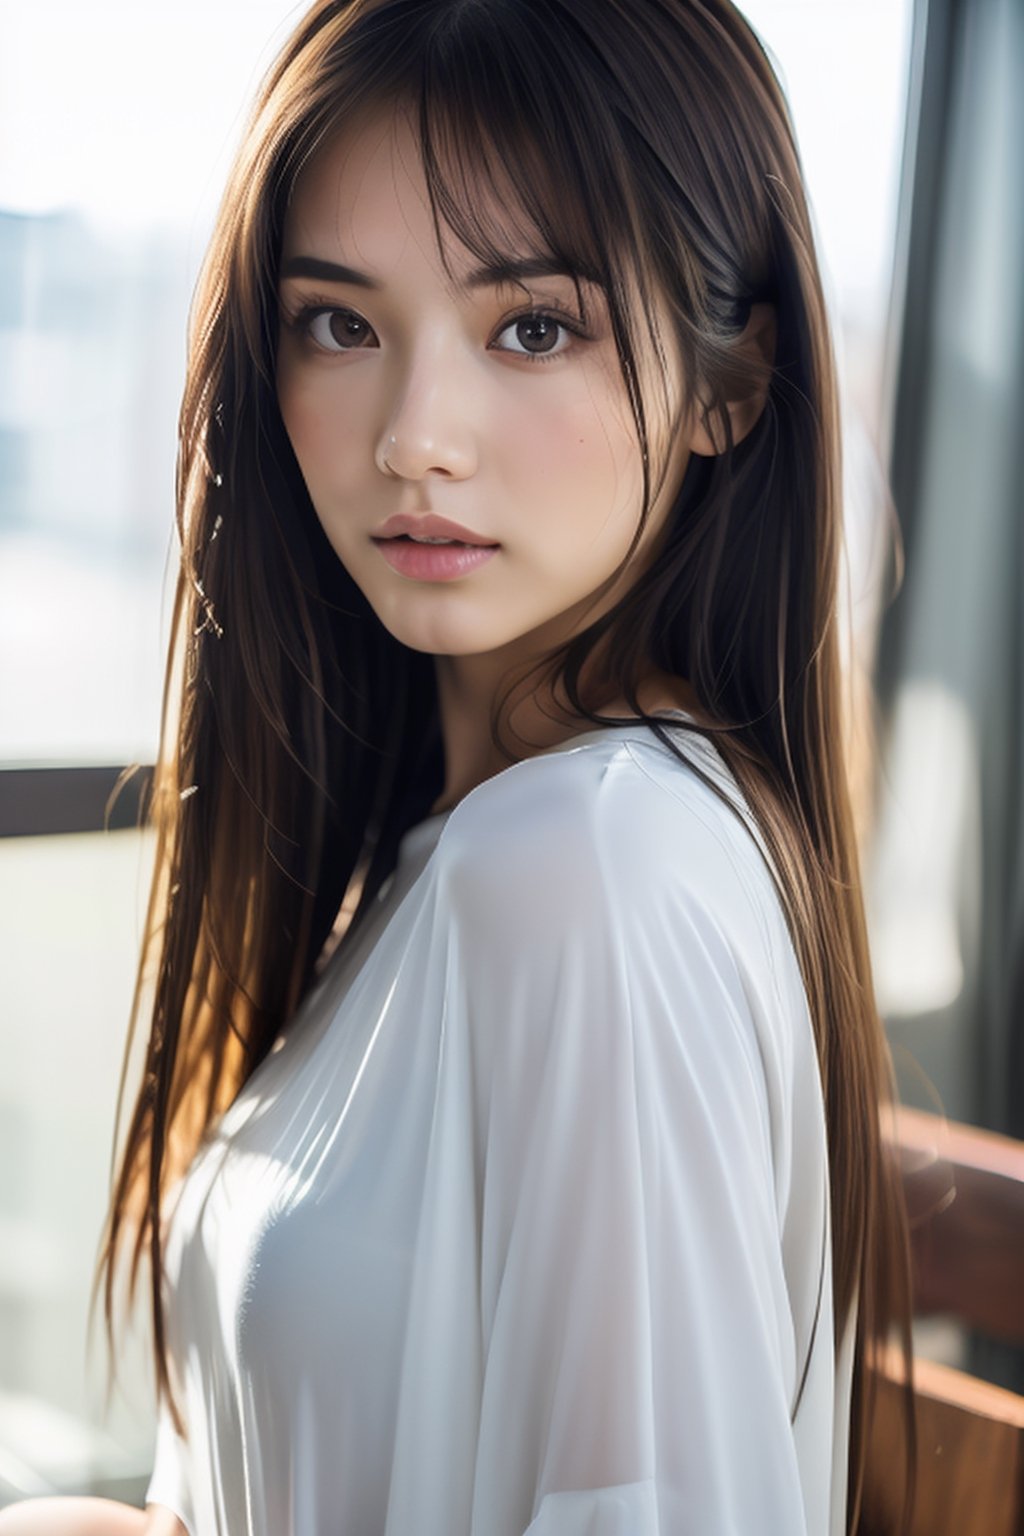 (8K, RAW shot, Highest Quality, masutepiece), High Definition RAW Color Pro Photos, (Realistic, Photorealism:1.37), (Highest Quality), (Highest shadow), (The best illustrations), (reality: 1.2), Distant view, (intricate-detail), 1 person, femele, 20 years old, Mystical Beautiful Girl, Perfect Anatomy, Perfect proportions, Perfect face, Strong brightness on the face, Facial details, (Girl's eyes staring at one viewer: 1.55), (stright long hair, blondehair, Parted bangs: 1.45), Slimed, Very transparent white see-through robes, Perspective from behind, Soak up the spotlight from the ceiling, sitting down on the floor, Concrete room,  um Home Detetive、conceptual art, Realism, godrays, Film Lighting, canon, high detailing, High quality, High Definition , 16K resolution, Center, Full body portrait,full body Esbian,Enhance,asian girl